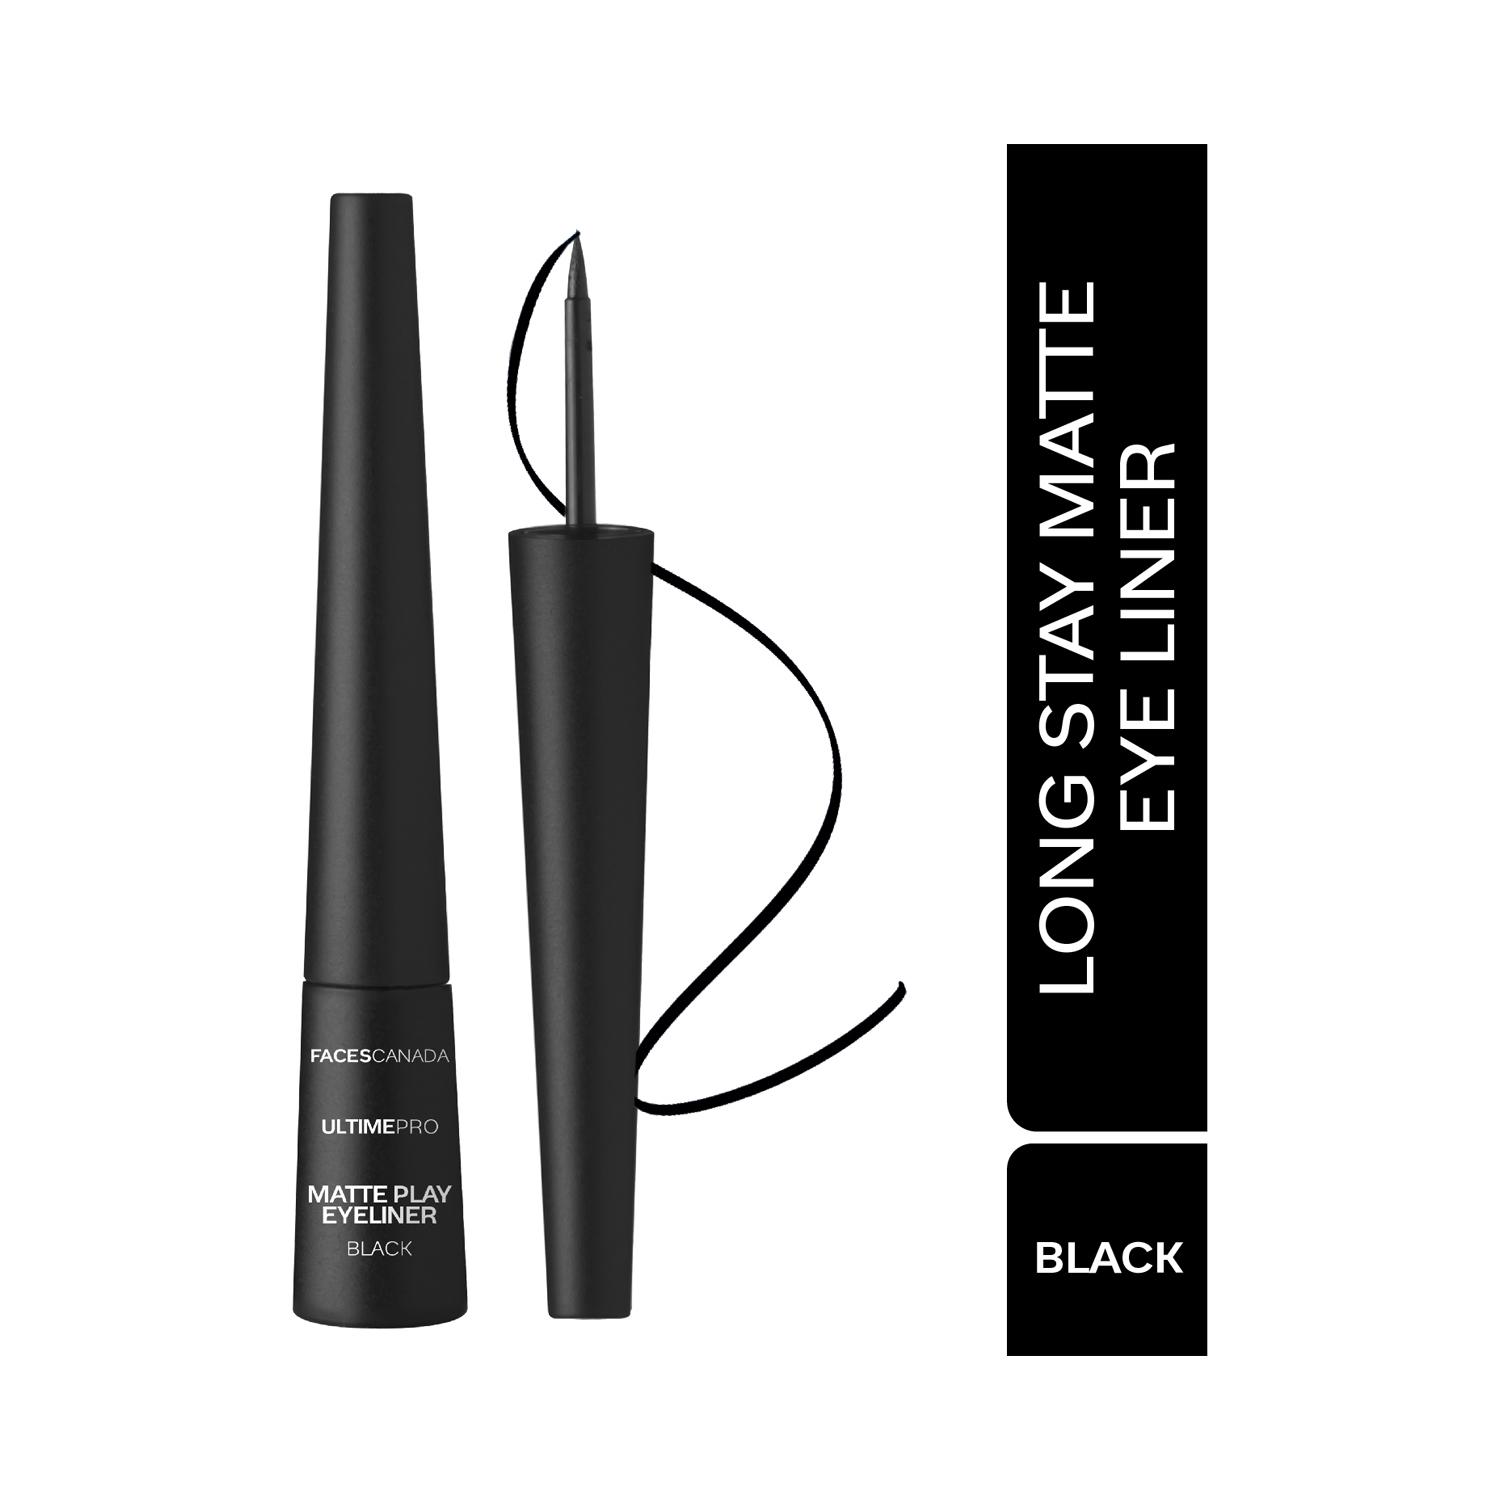 Faces Canada | Faces Canada Ultime Pro Matte Play Eyeliner - Black (2.5ml)